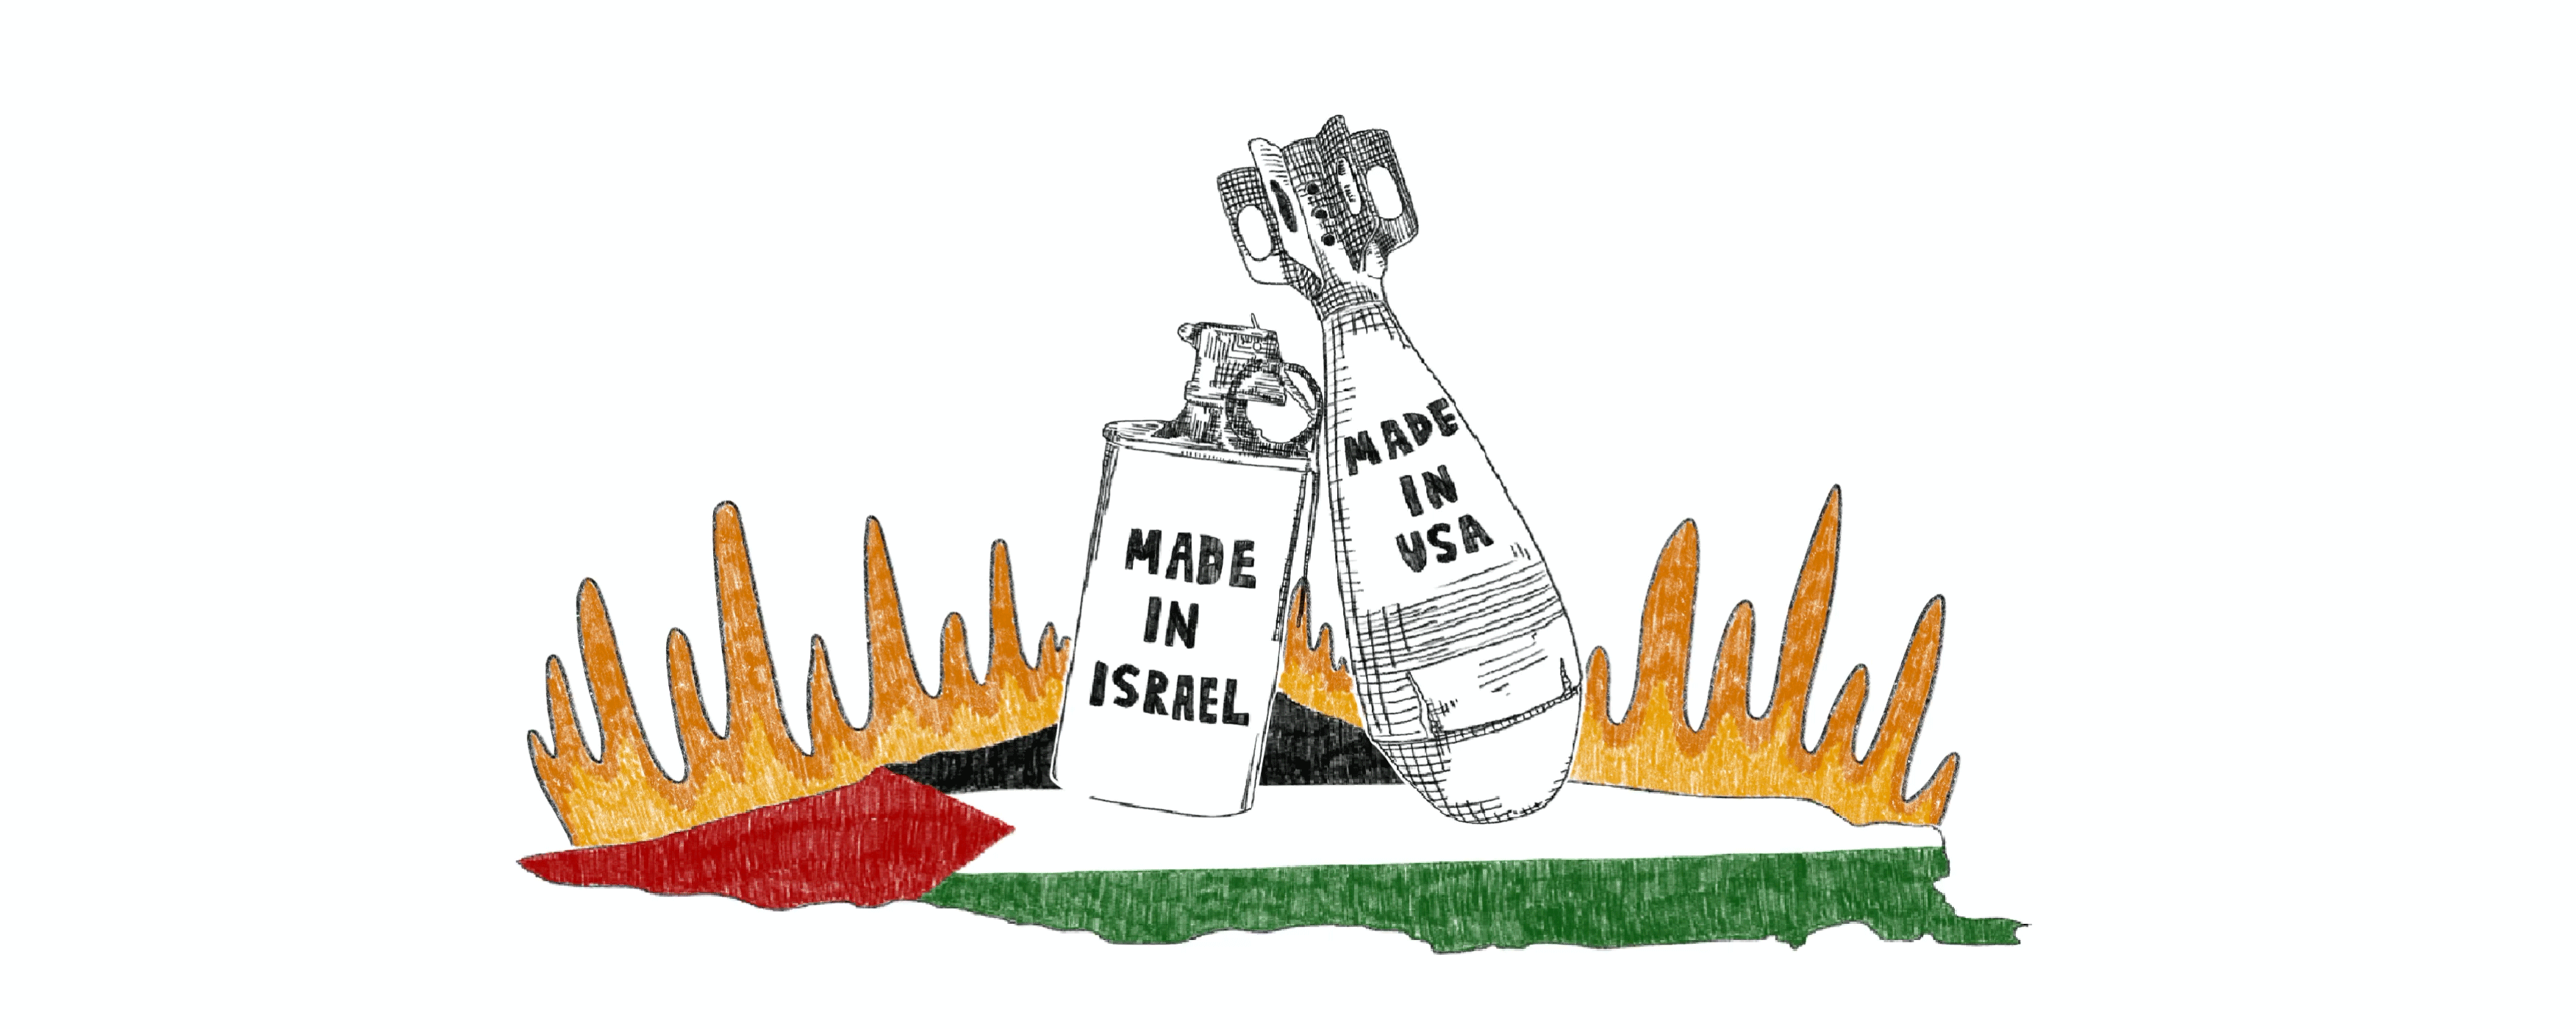 An image of a bomb labeled "Made in USA", a tear gas canister labeled "Made in Israel" hitting a map of Palestine colored in red, green, black and white and a border of flickering flames.